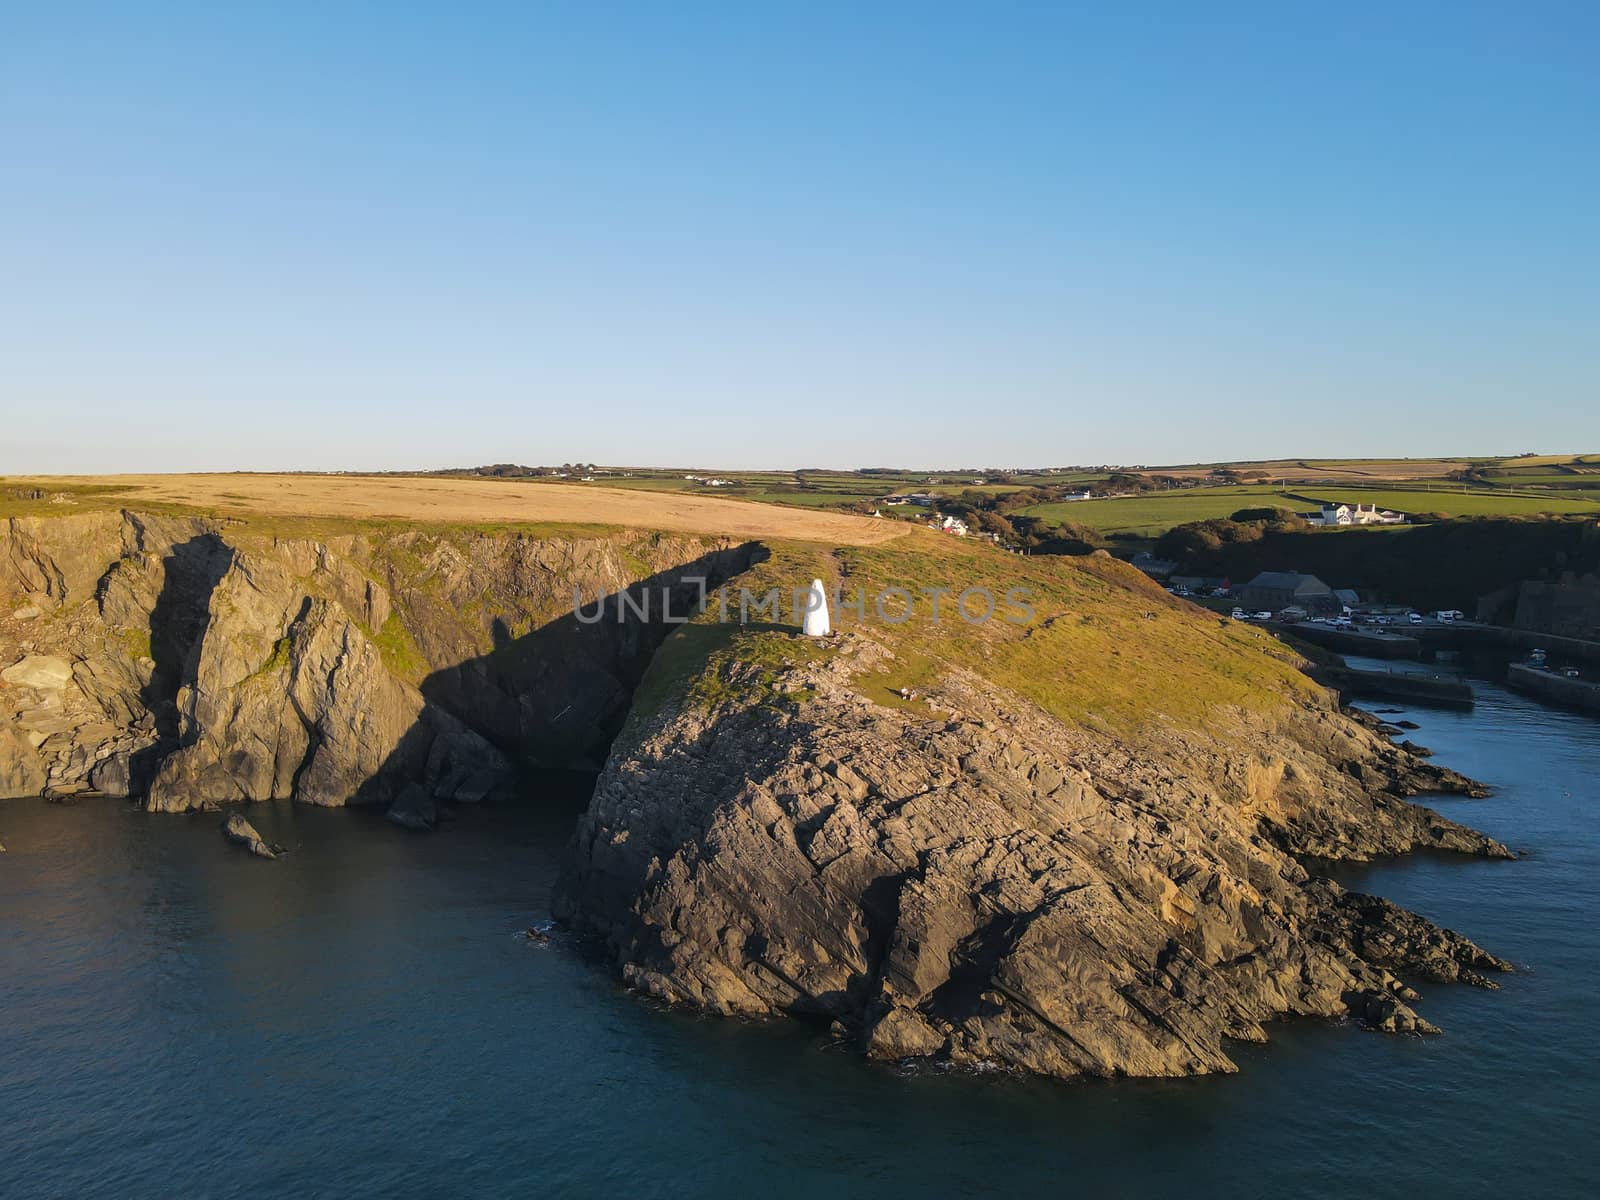 A Hidden Port On The Welsh Coast Marked By Two White Pillars by WCLUK